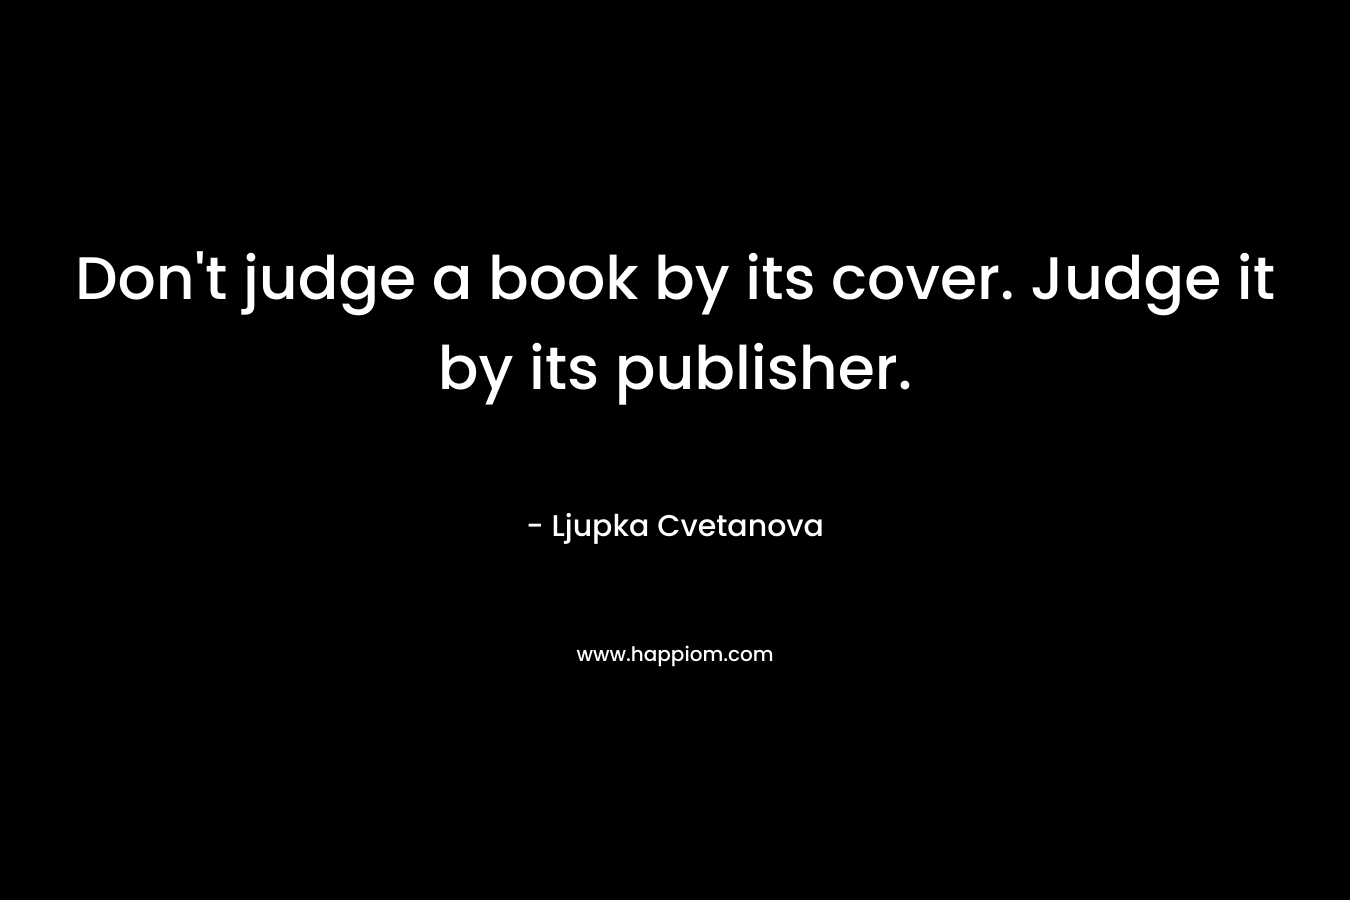 Don't judge a book by its cover. Judge it by its publisher.